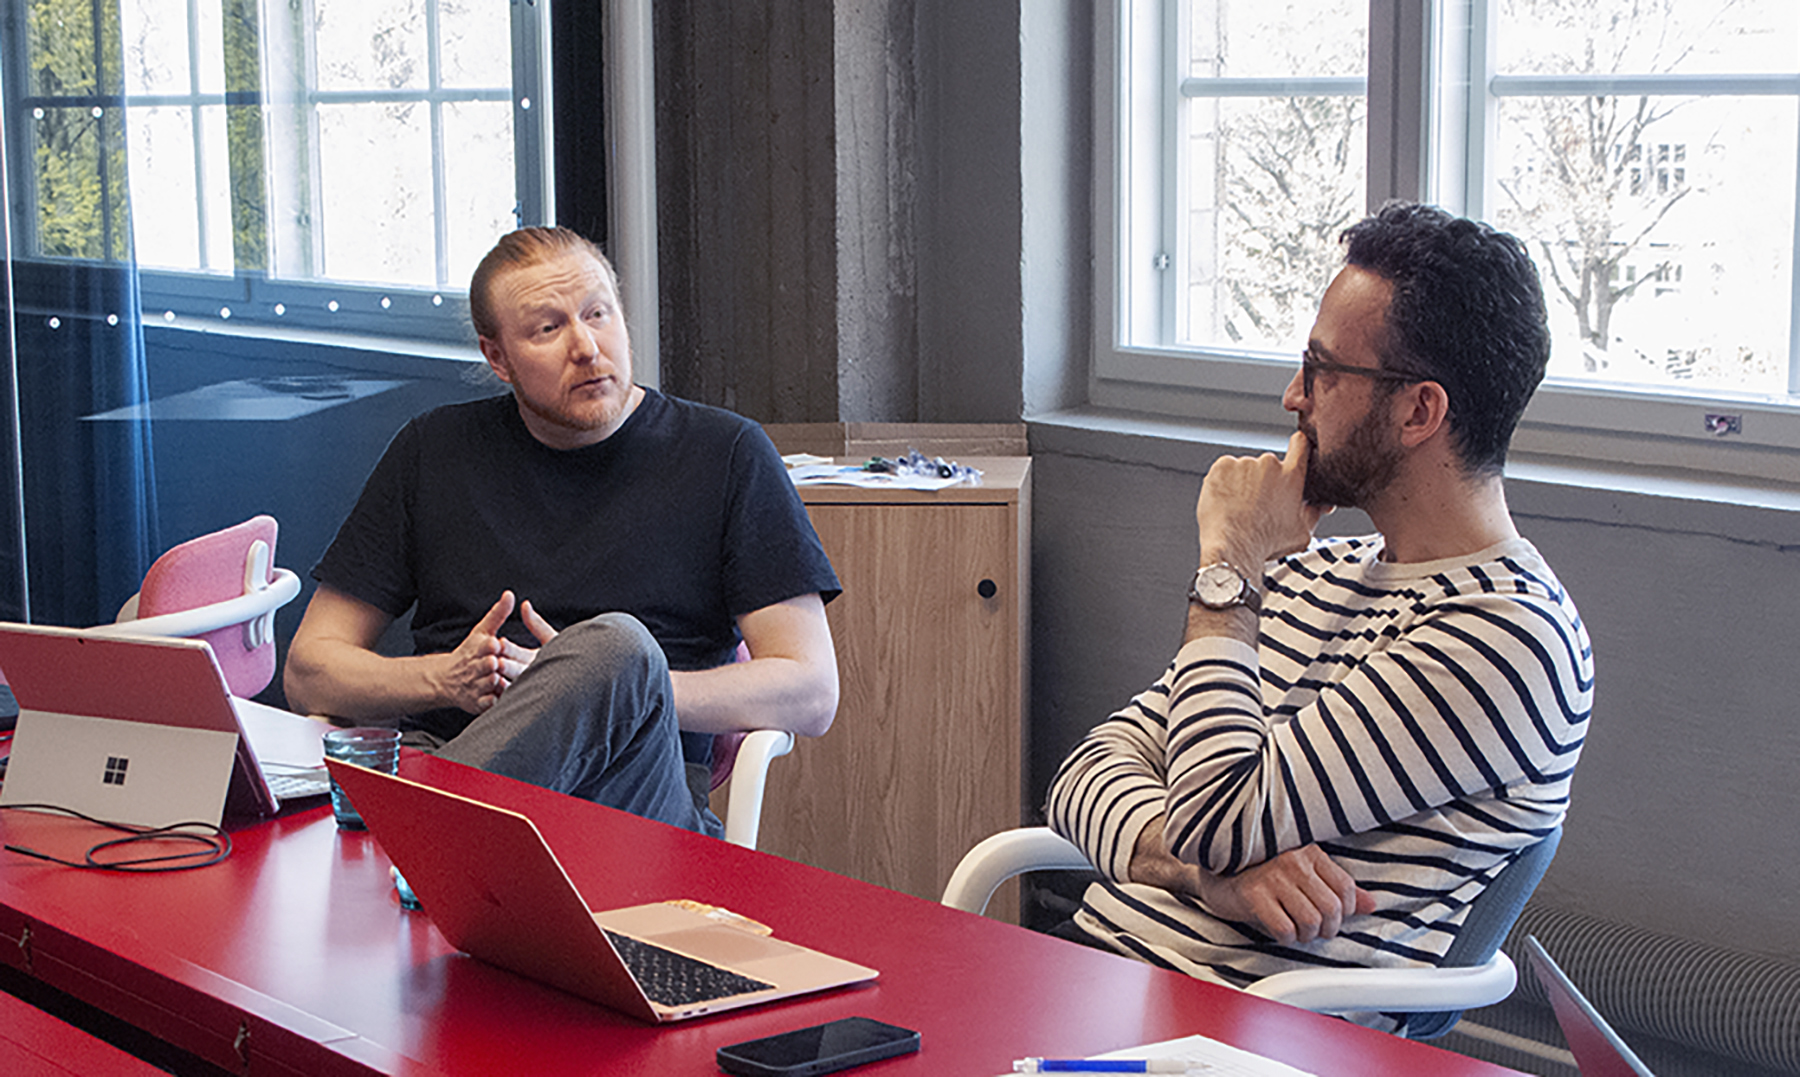 Coaches of HXRC Accelerator, Oki Tåg and Pouria Kay, are discussing at the last accelerator day. They are sitting on chairs in front of a big red table.